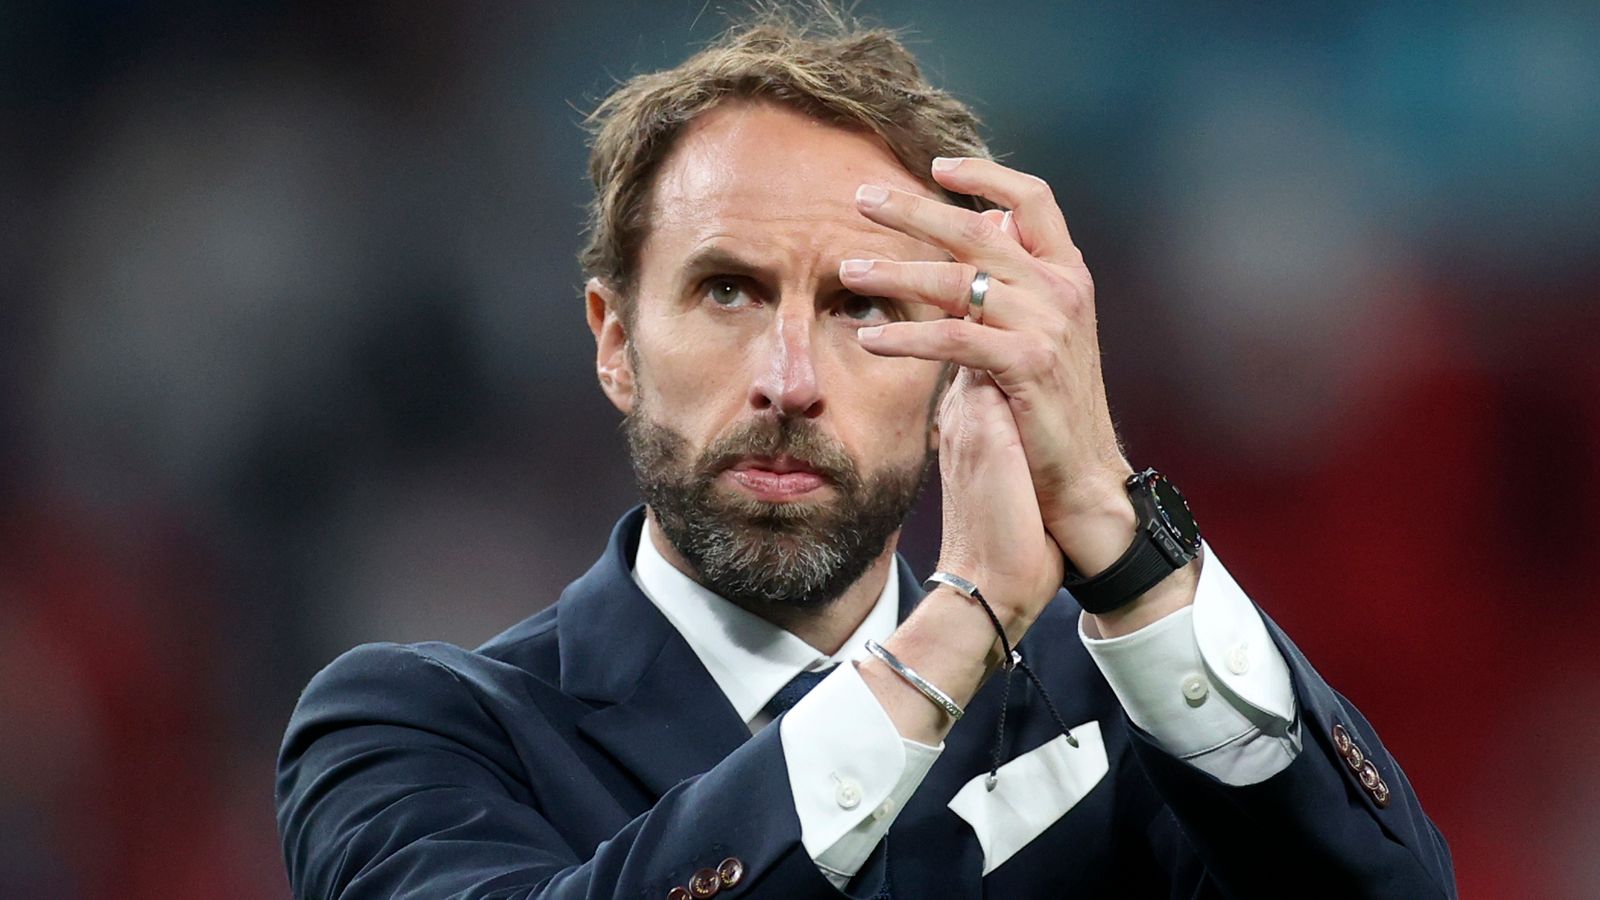 Gareth Southgate: England manager set for contract talks in November